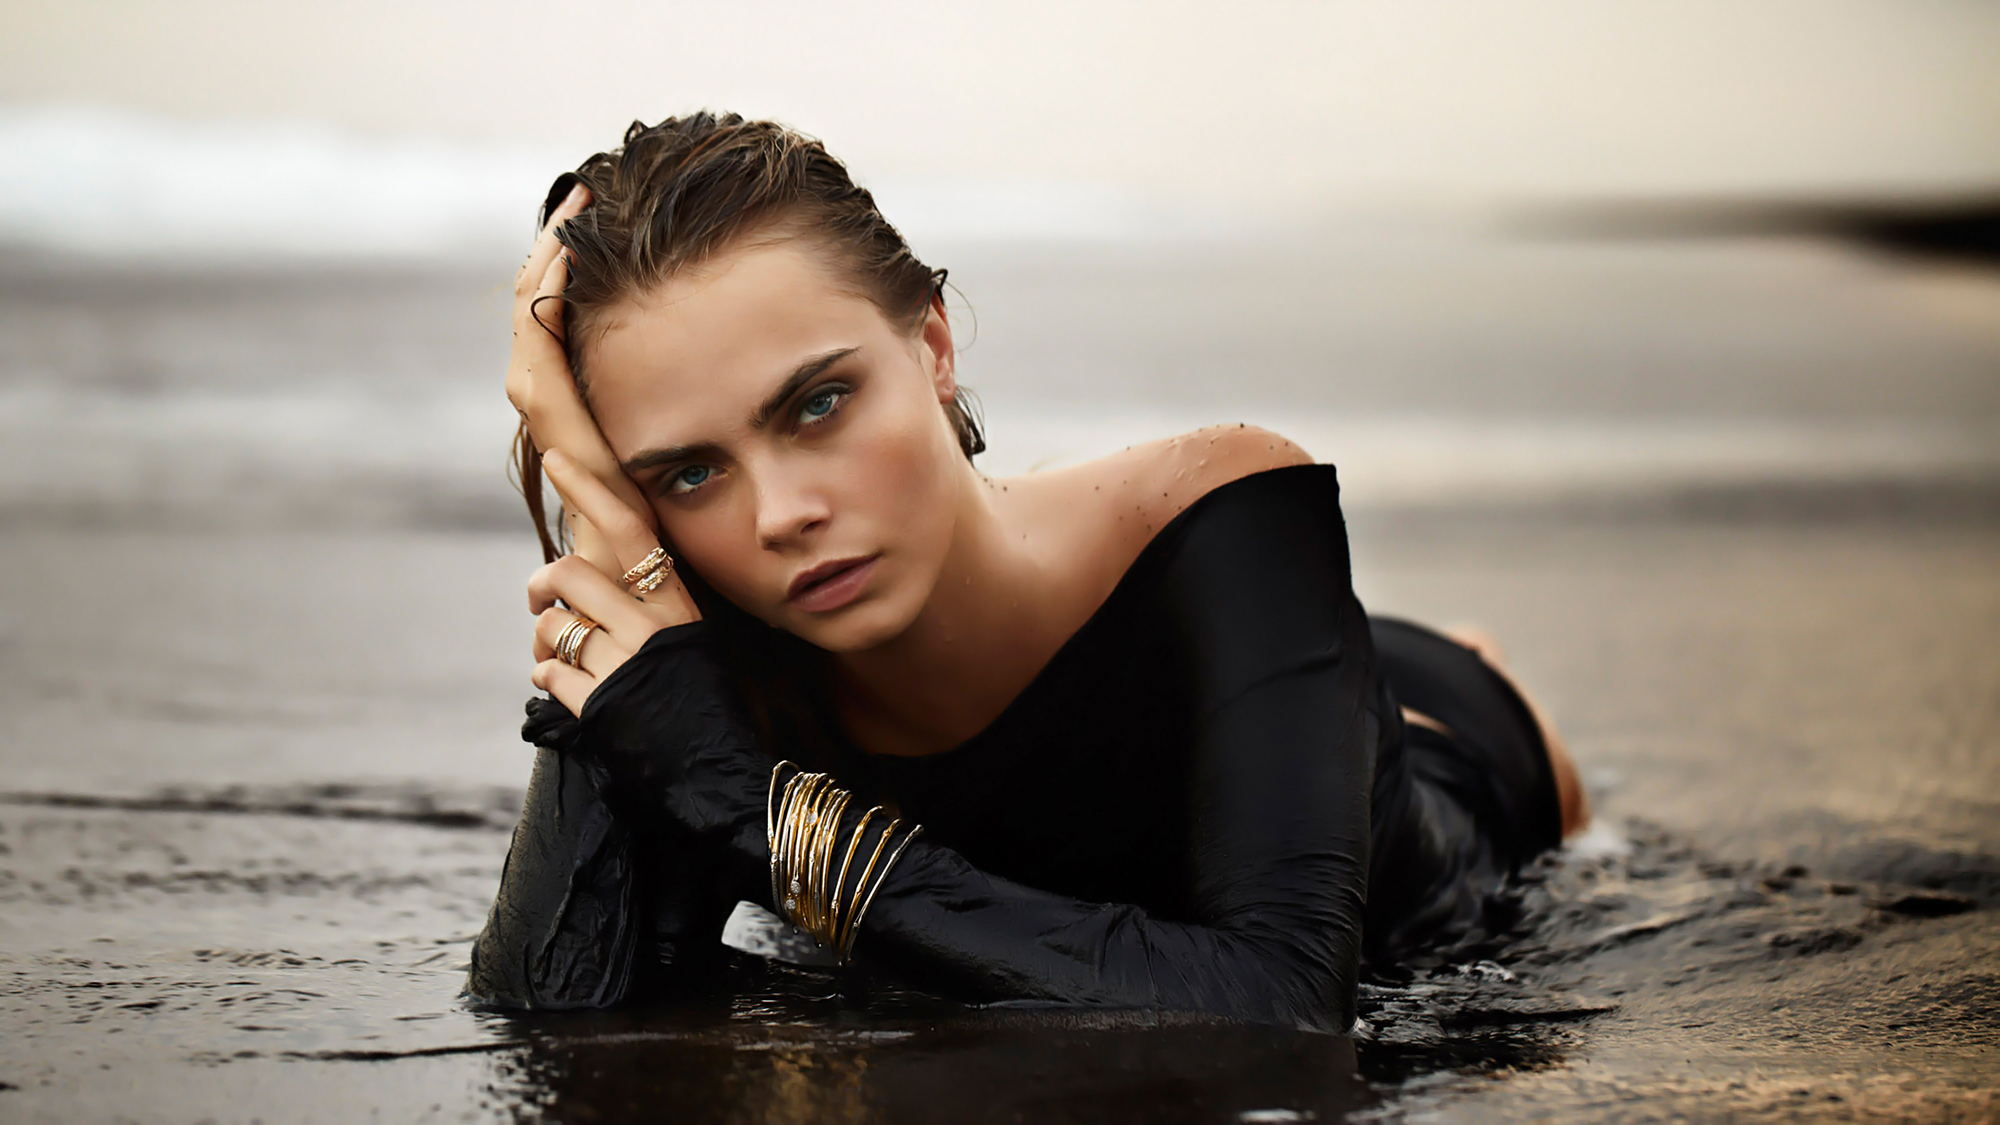 Cara Delevingne Photoshoot 2017 Hd Celebrities 4k Wallpapers Images Backgrounds Photos And